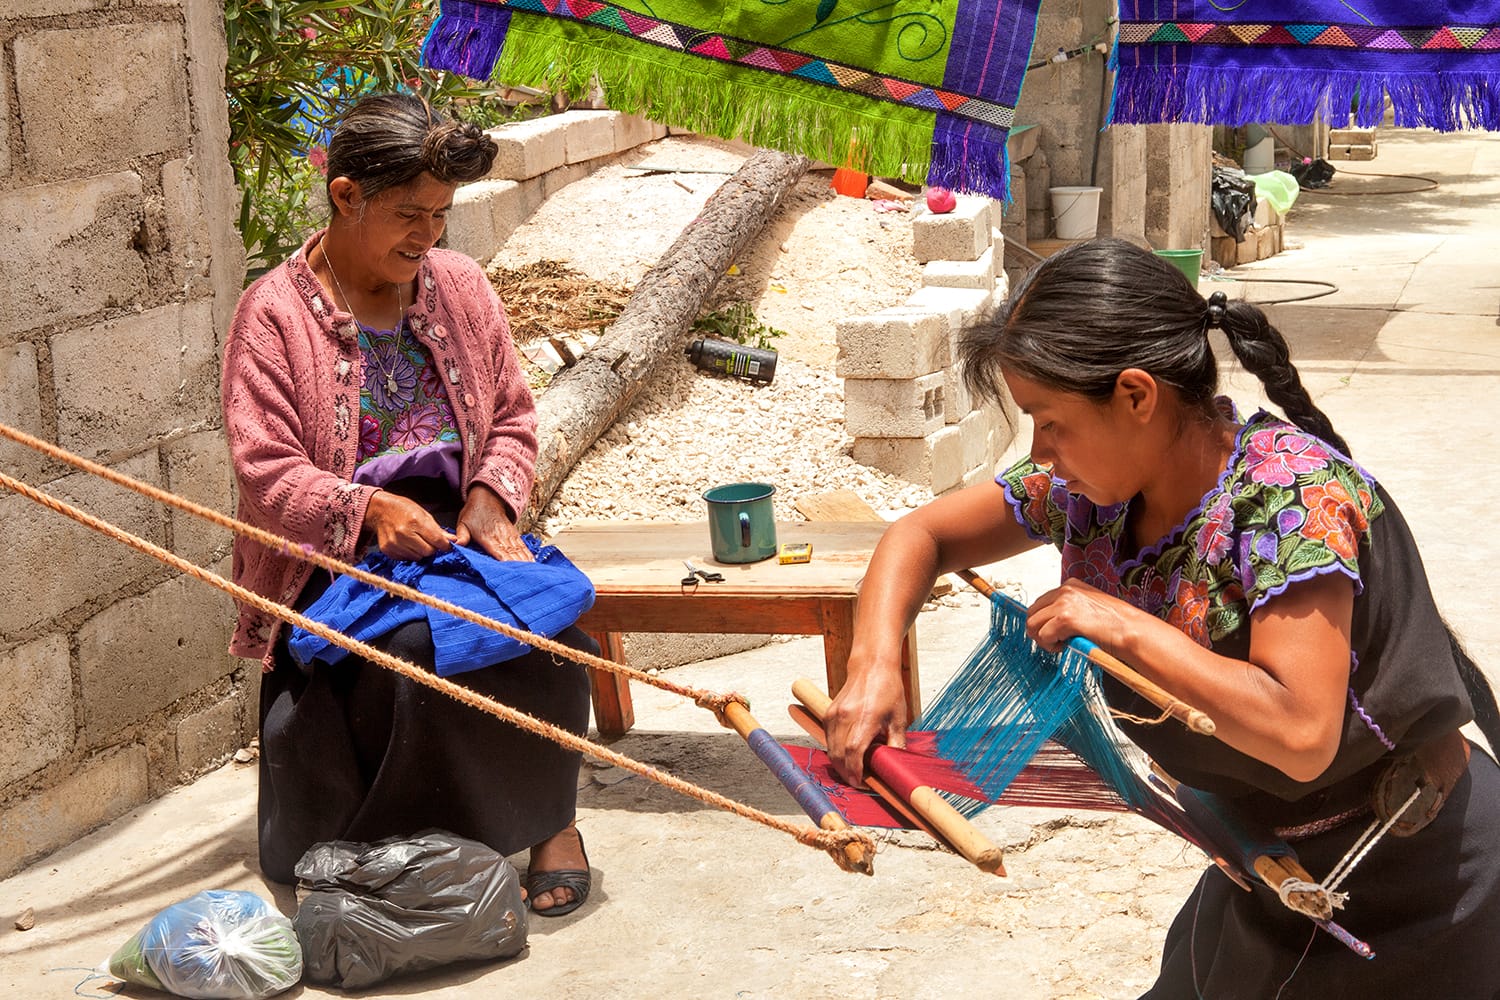 Indigenous Tzotzil women weaving a traditional Huipil at the loom in Zinacantan, Mexico